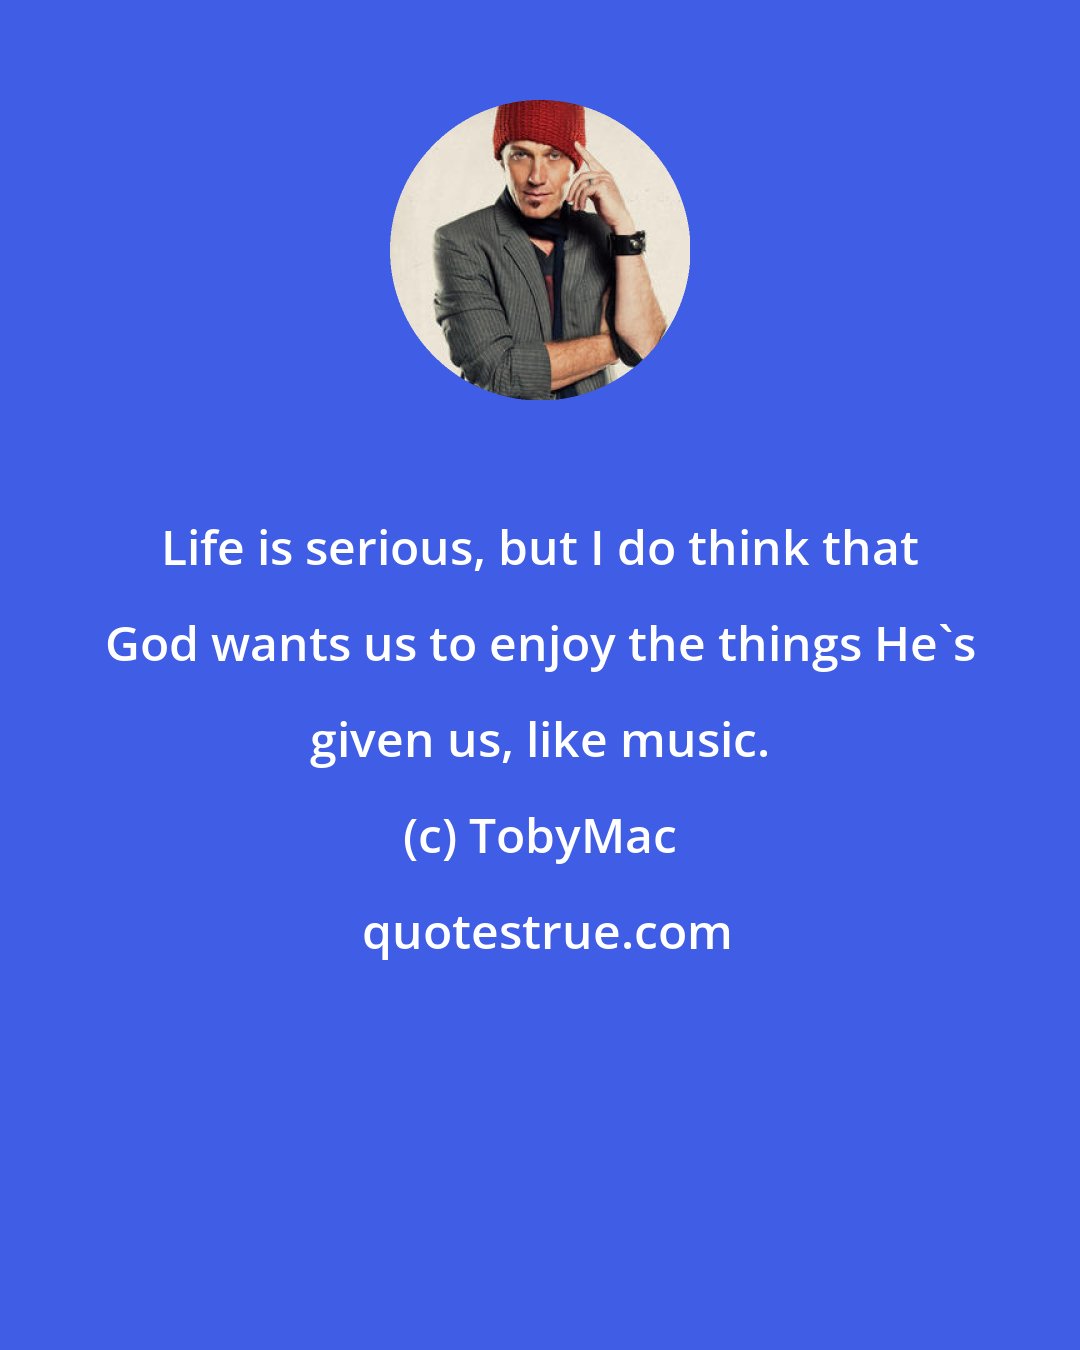 TobyMac: Life is serious, but I do think that God wants us to enjoy the things He's given us, like music.